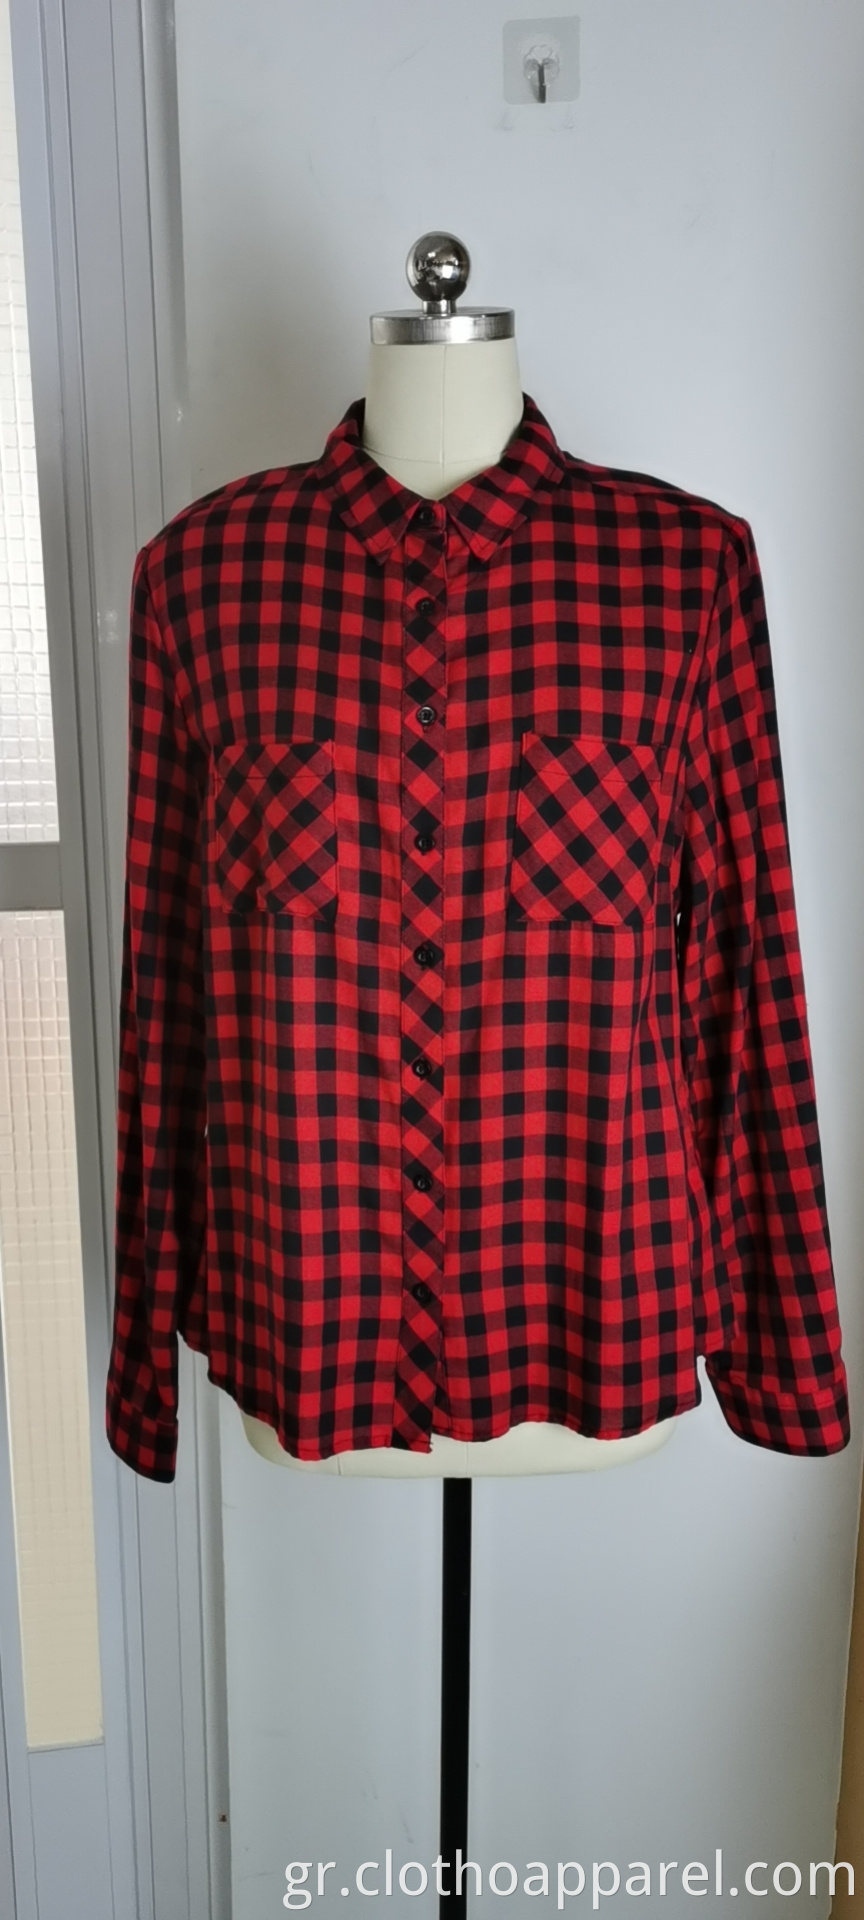 Wholesale Ladies Red And Black Checked Shirts